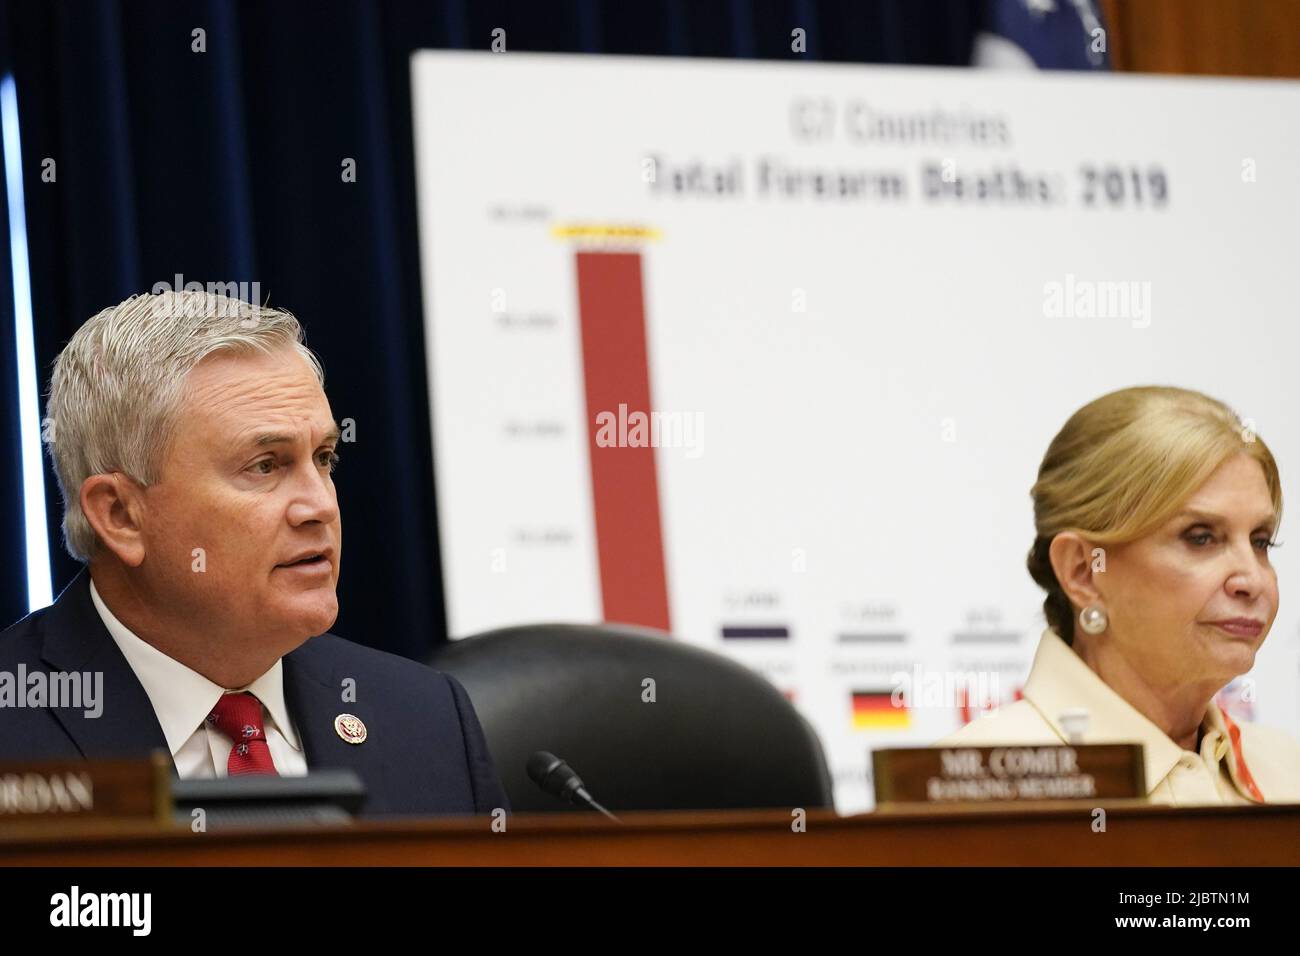 Washington, United States. 08th June, 2022. Ranking member Rep. James Comer Jr., R-KY, speaks as Chairwoman Rep. Carolyn Maloney, D-NY, (R) listens during a House Committee on Oversight and Reform hearing on gun violence on Capitol Hill in Washington, DC on Wednesday, June 8, 2022. Pool photo by Andrew Harnik/UPI Credit: UPI/Alamy Live News Stock Photo